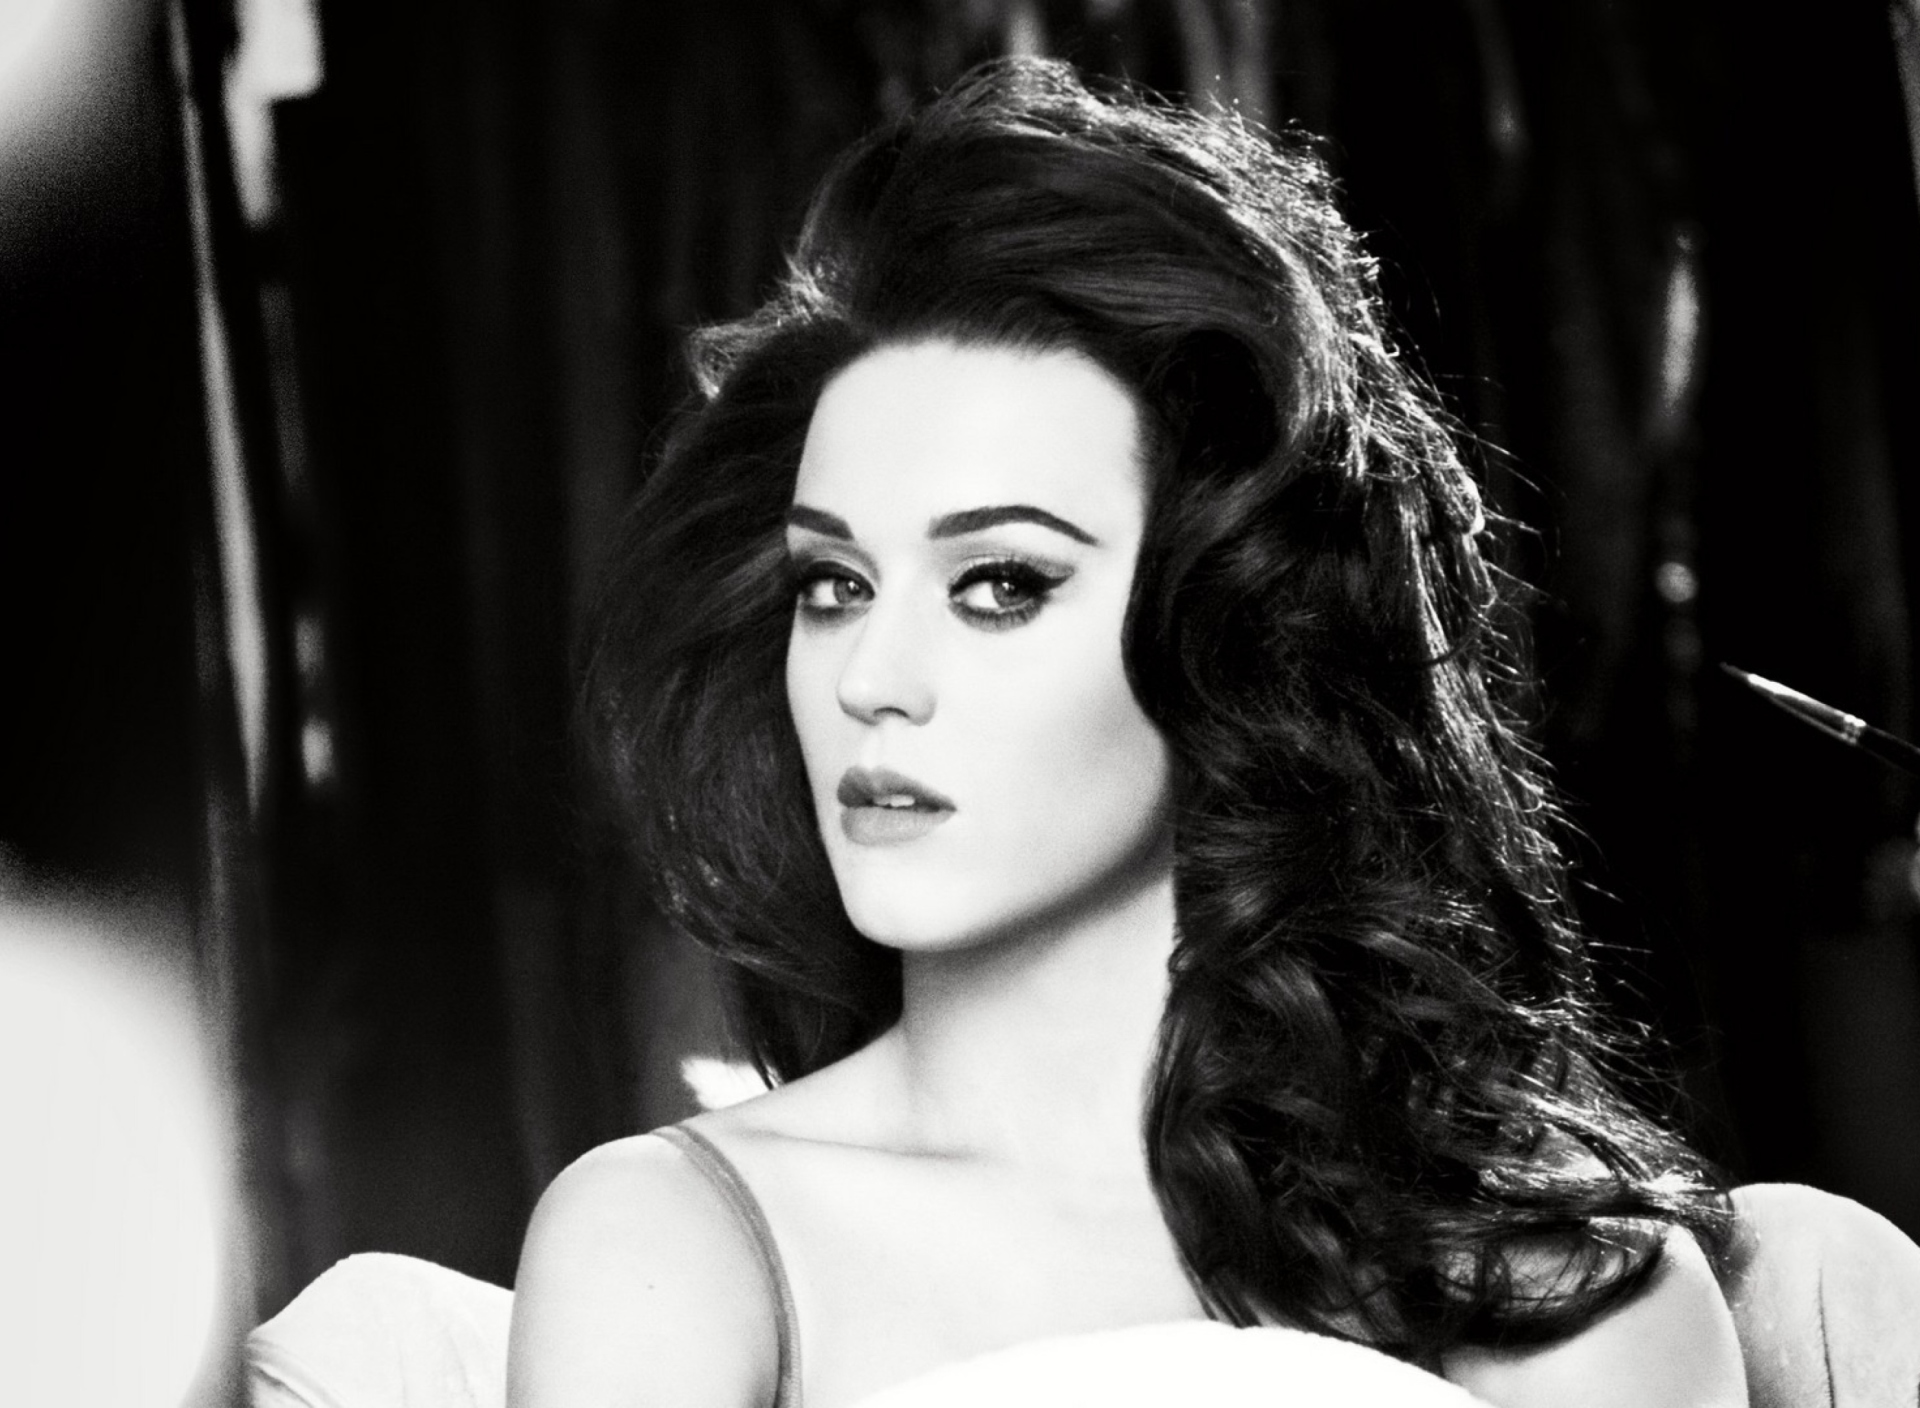 Katy Perry Black And White wallpaper 1920x1408